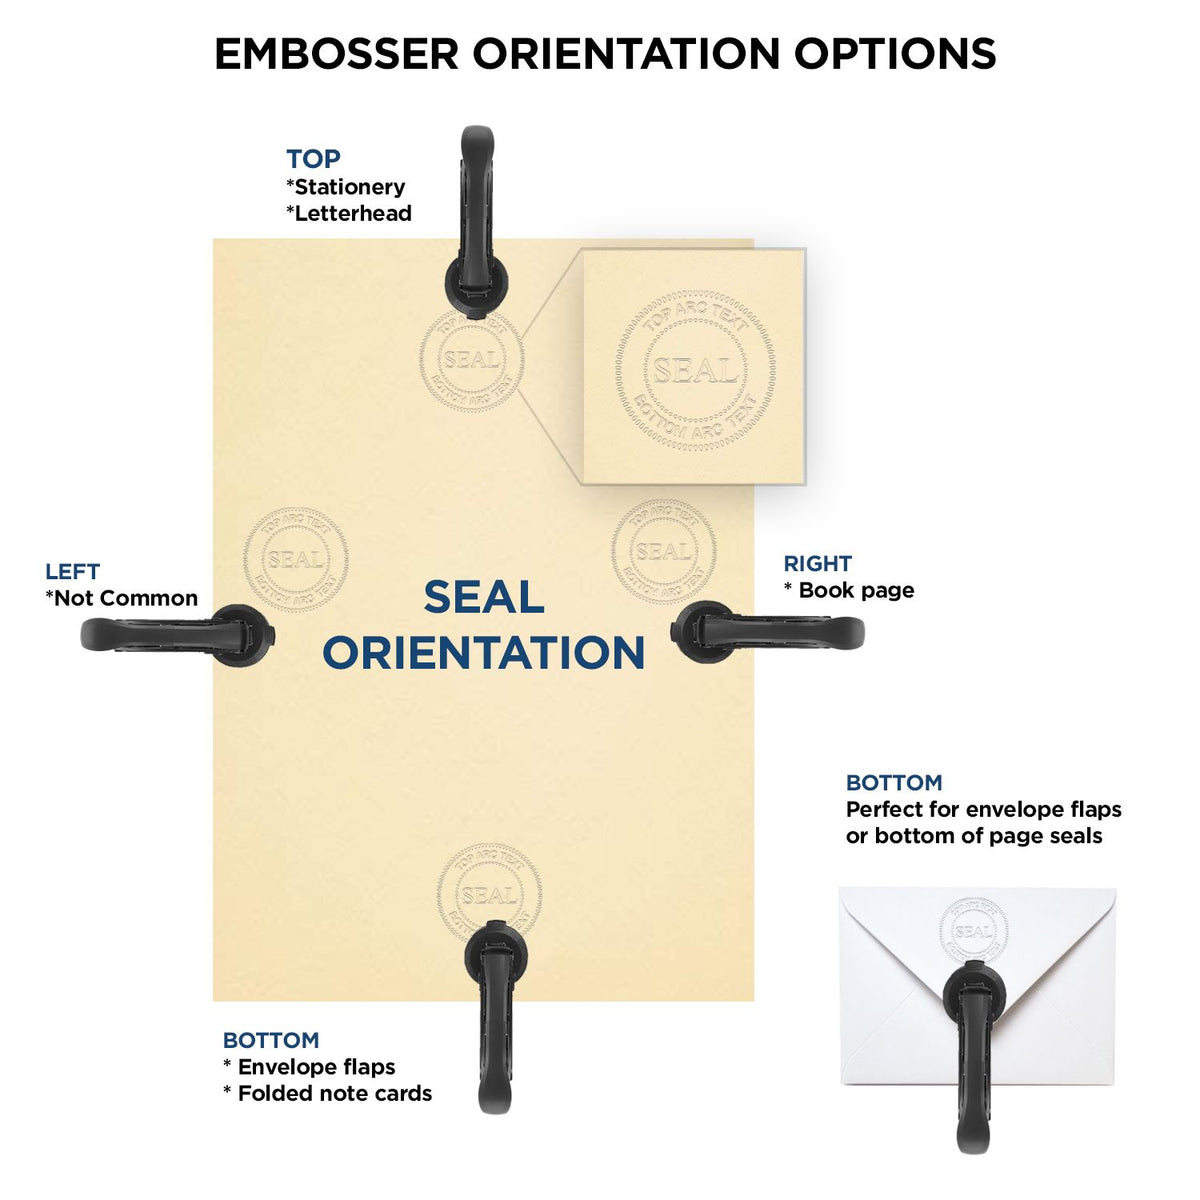 An infographic for the Long Reach Connecticut PE Seal showing embosser orientation, this is showing examples of a top, bottom, right and left insert.